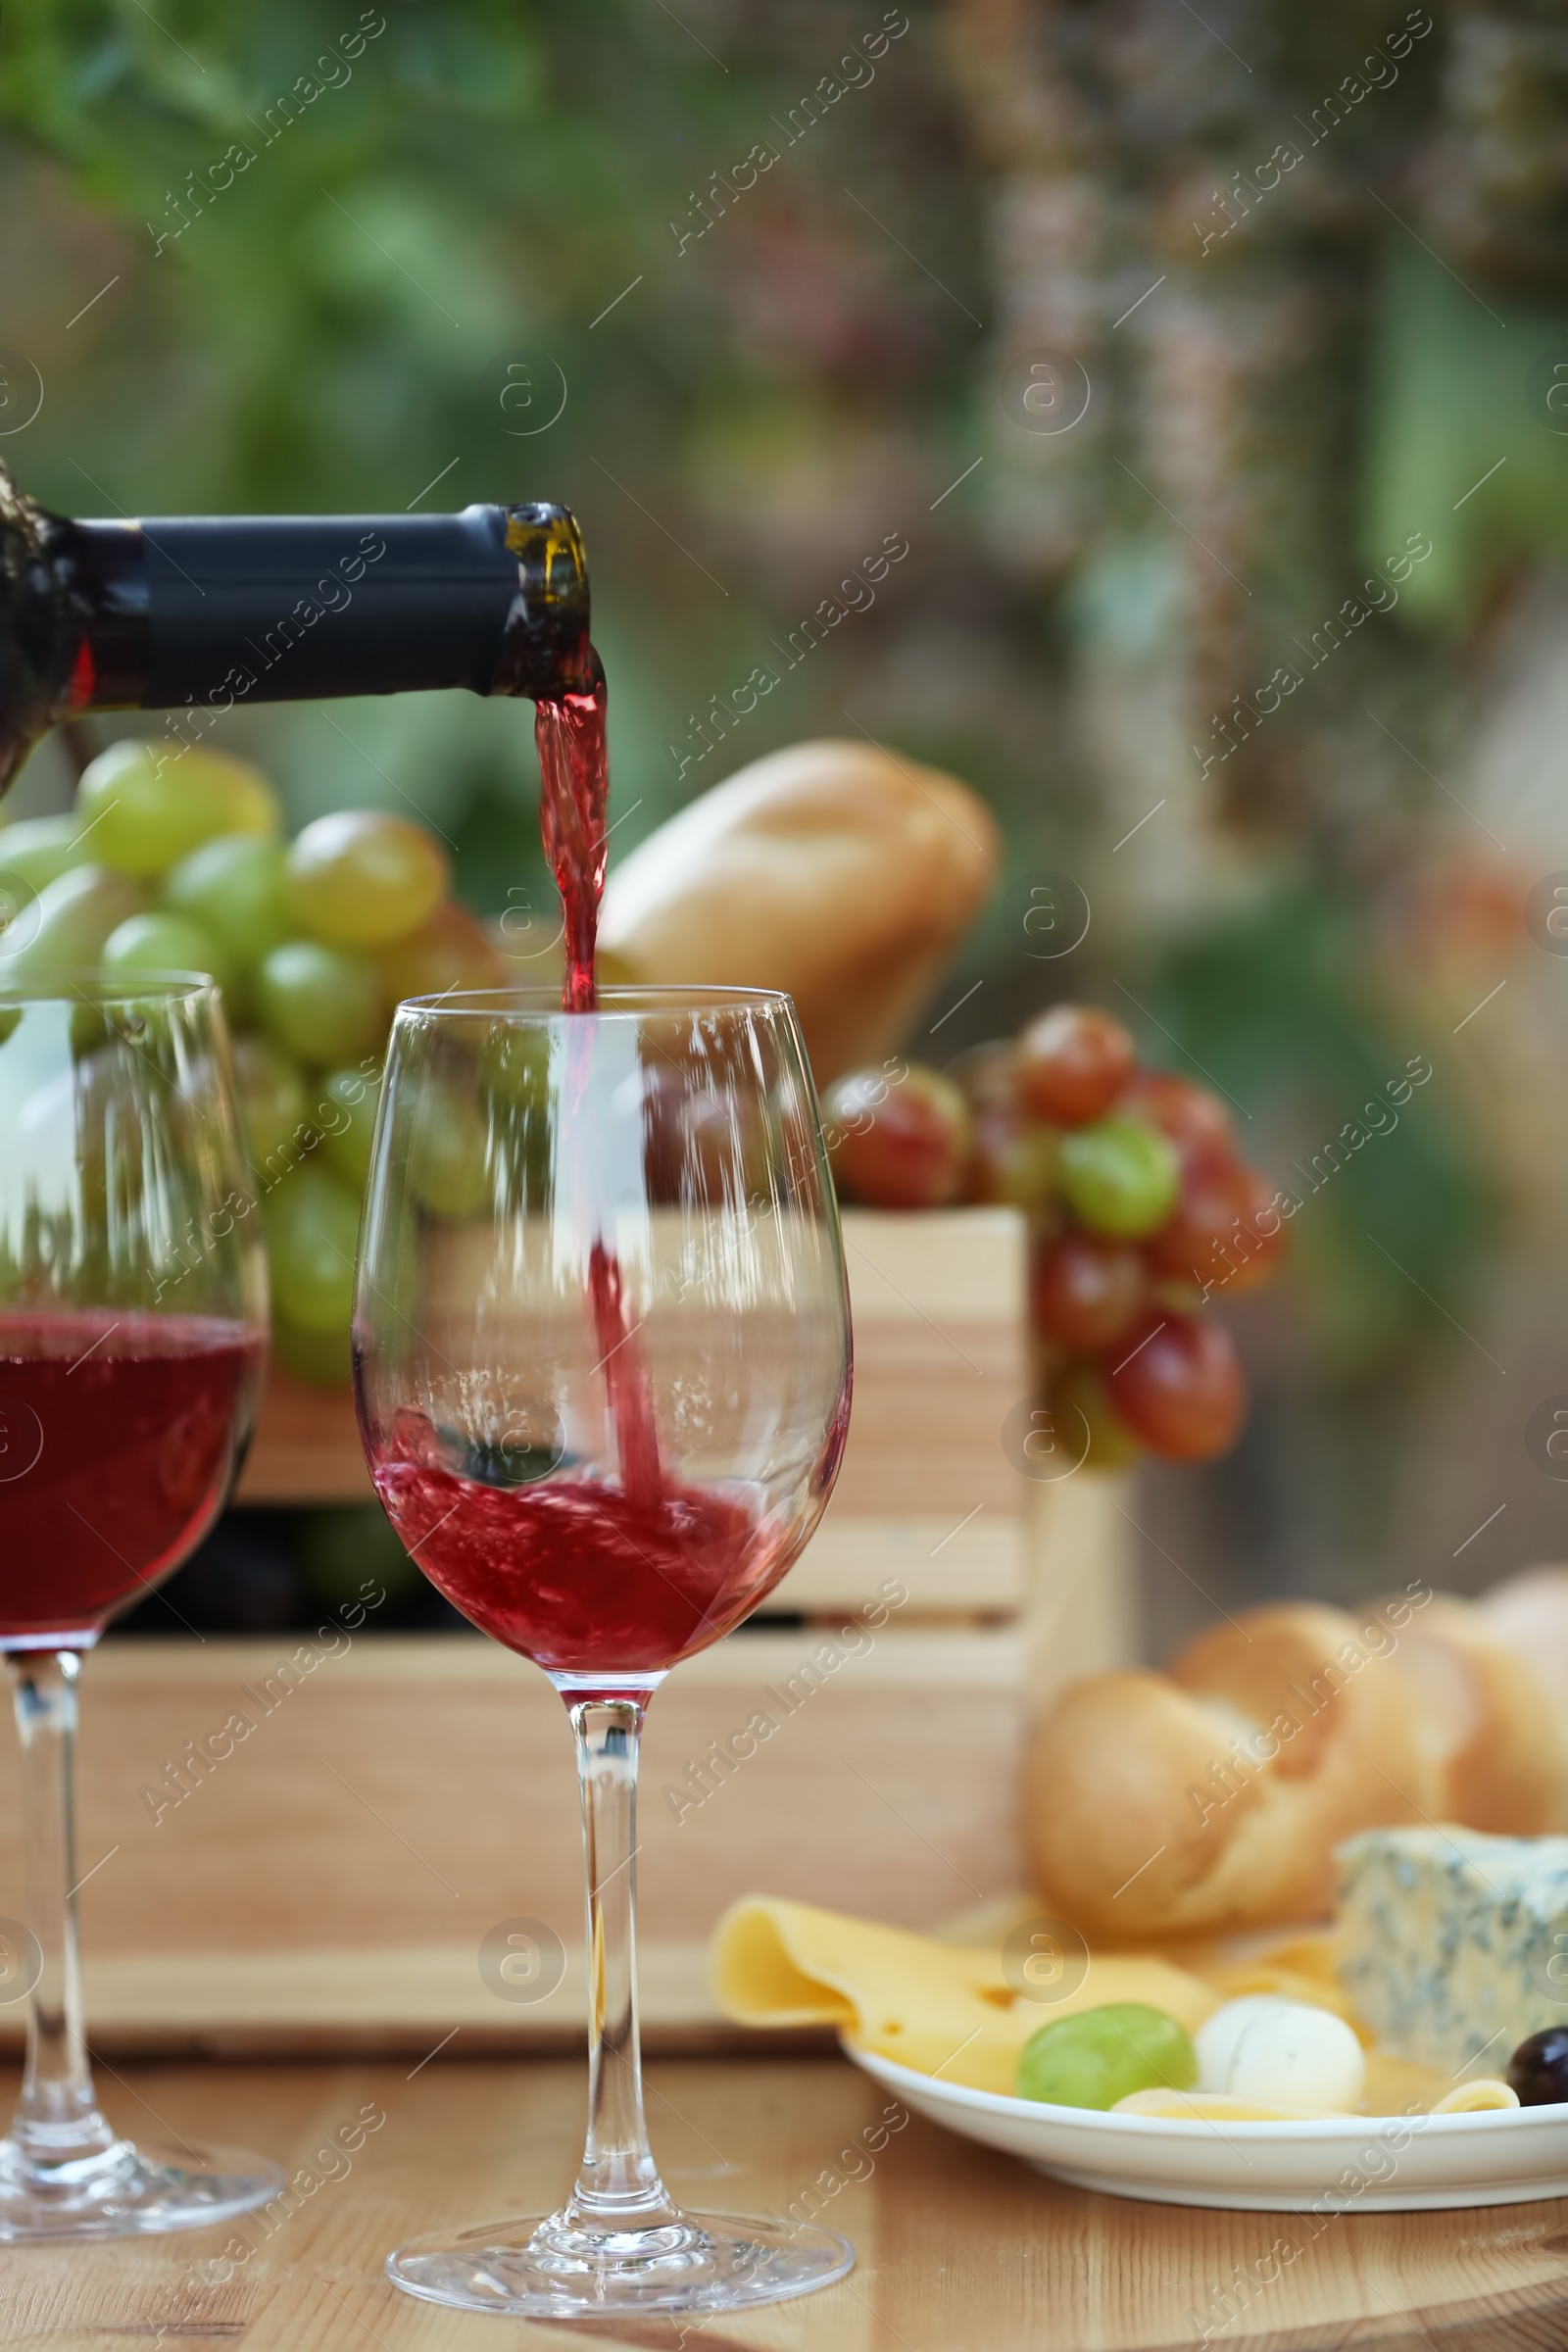 Photo of Pouring red wine from bottle into glass on table in vineyard